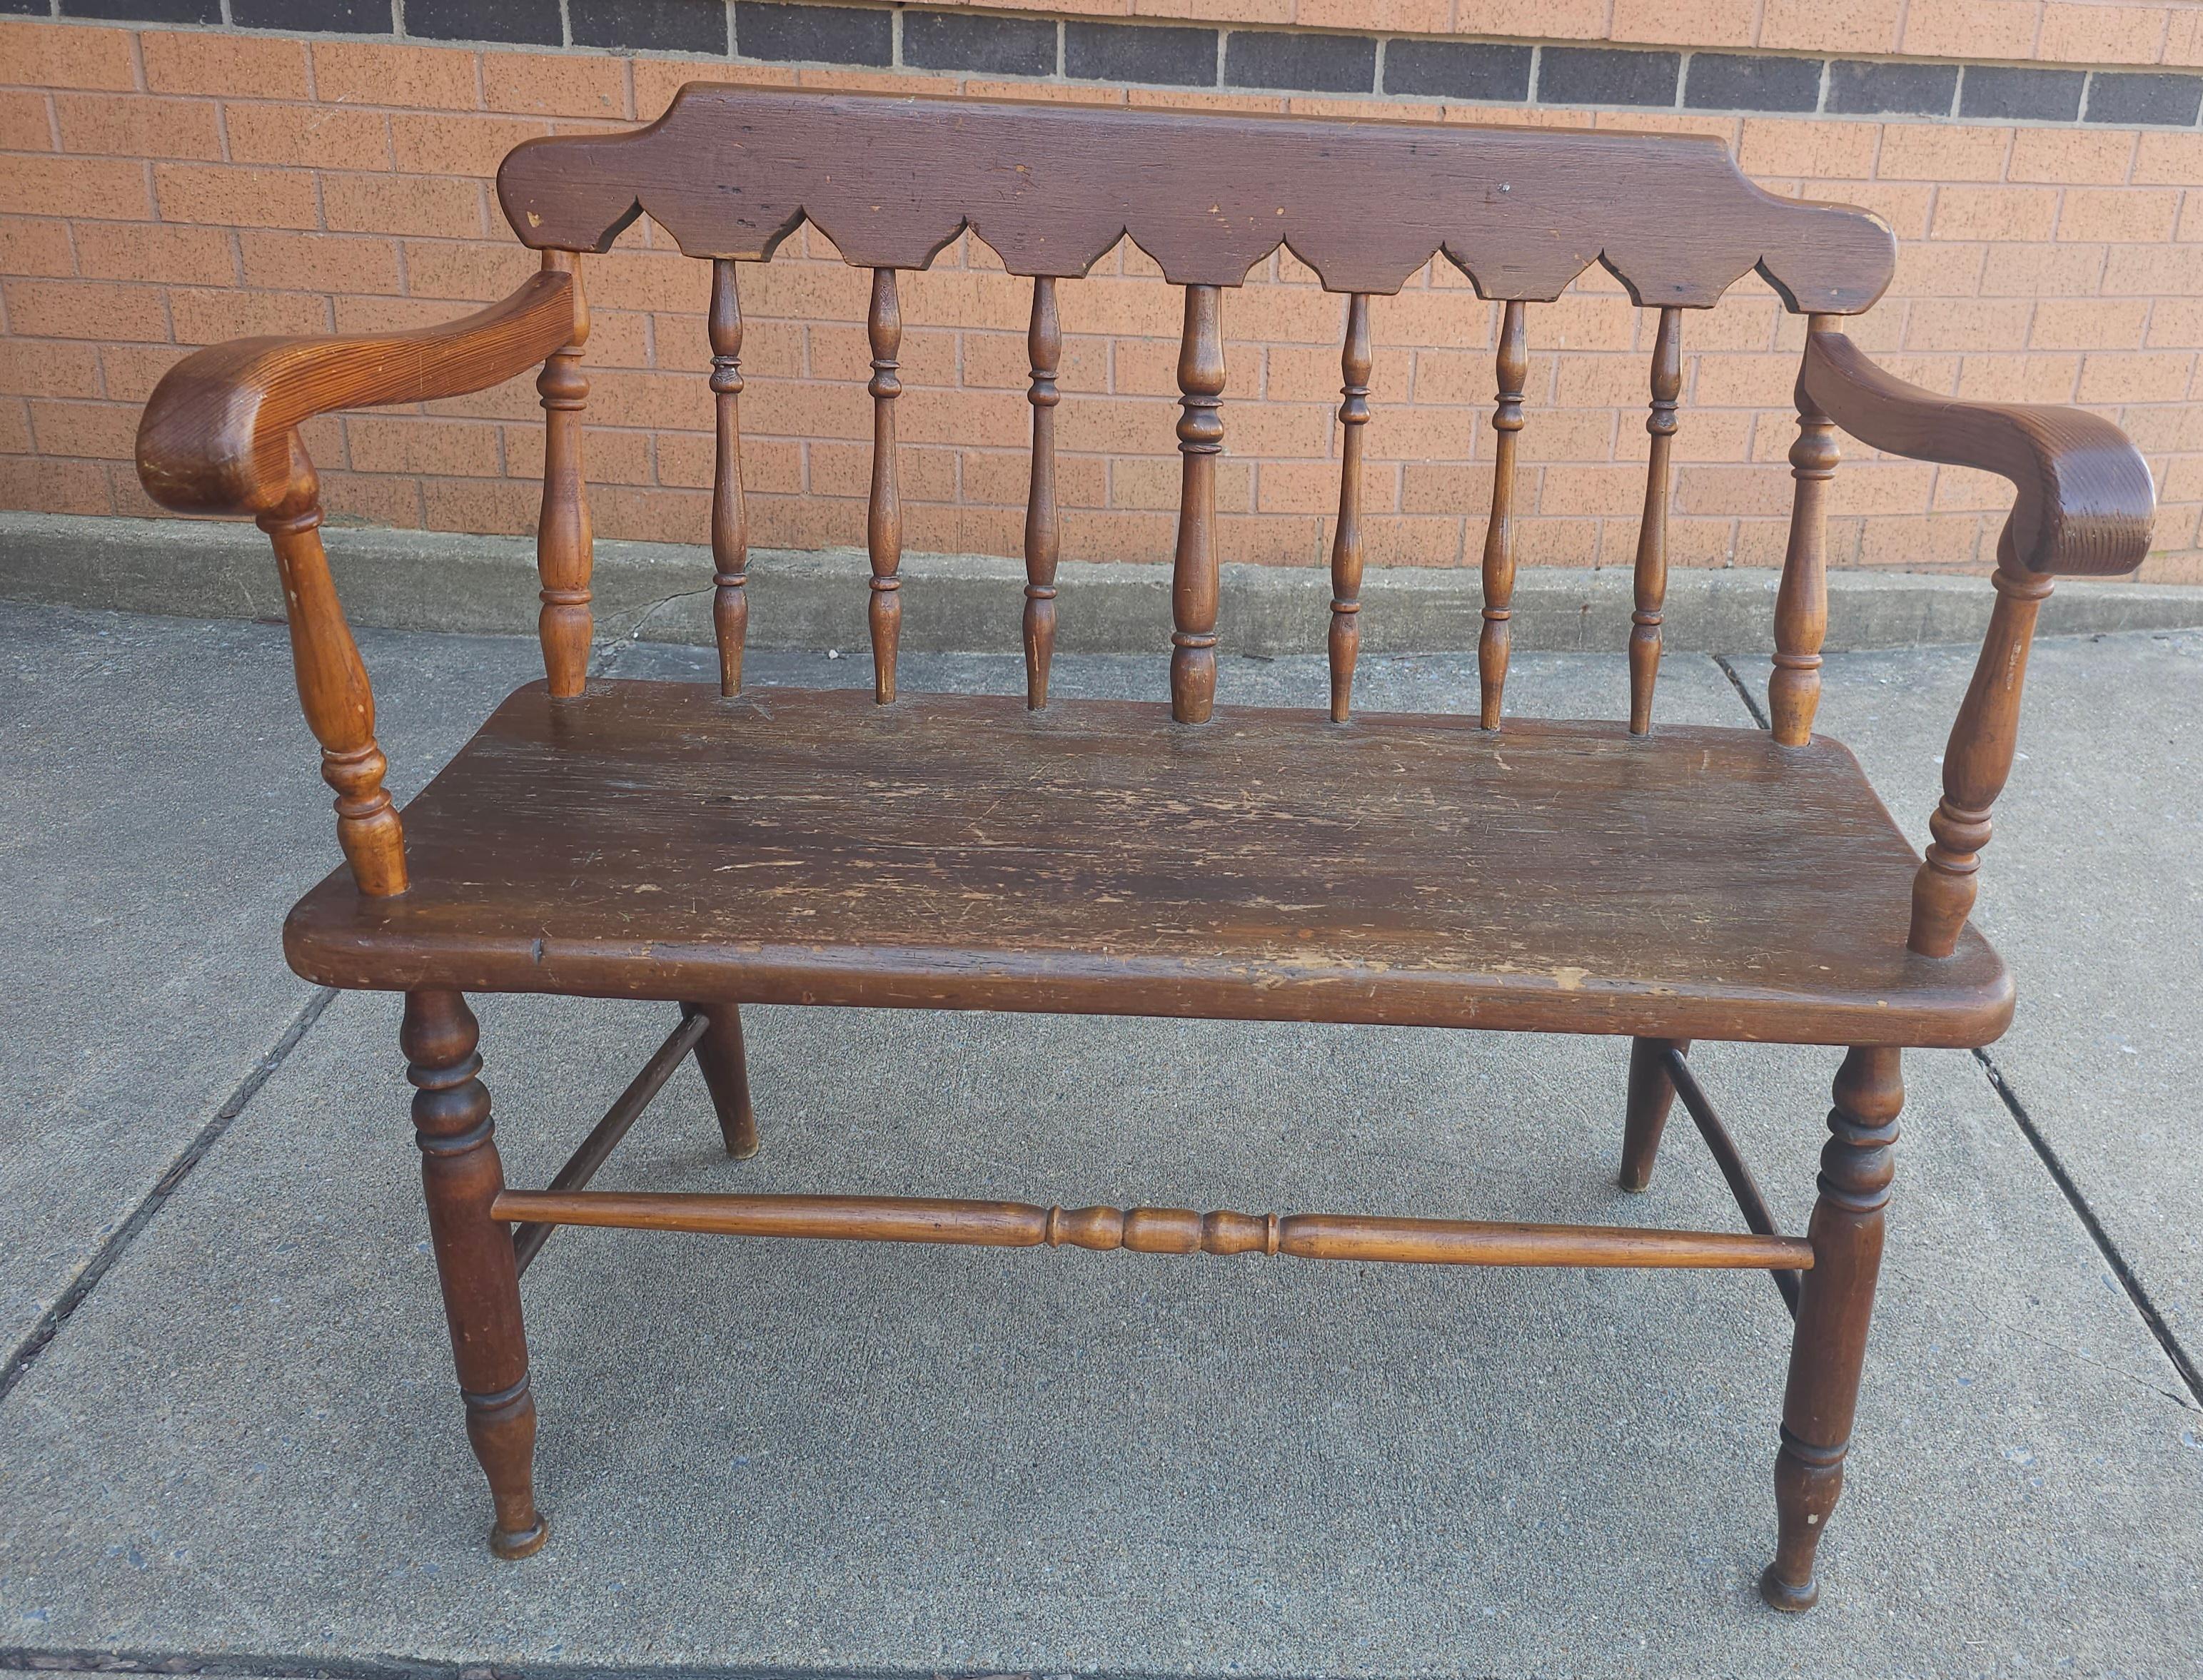 Early American Two Seater Setteee Bench In Good Condition For Sale In Germantown, MD